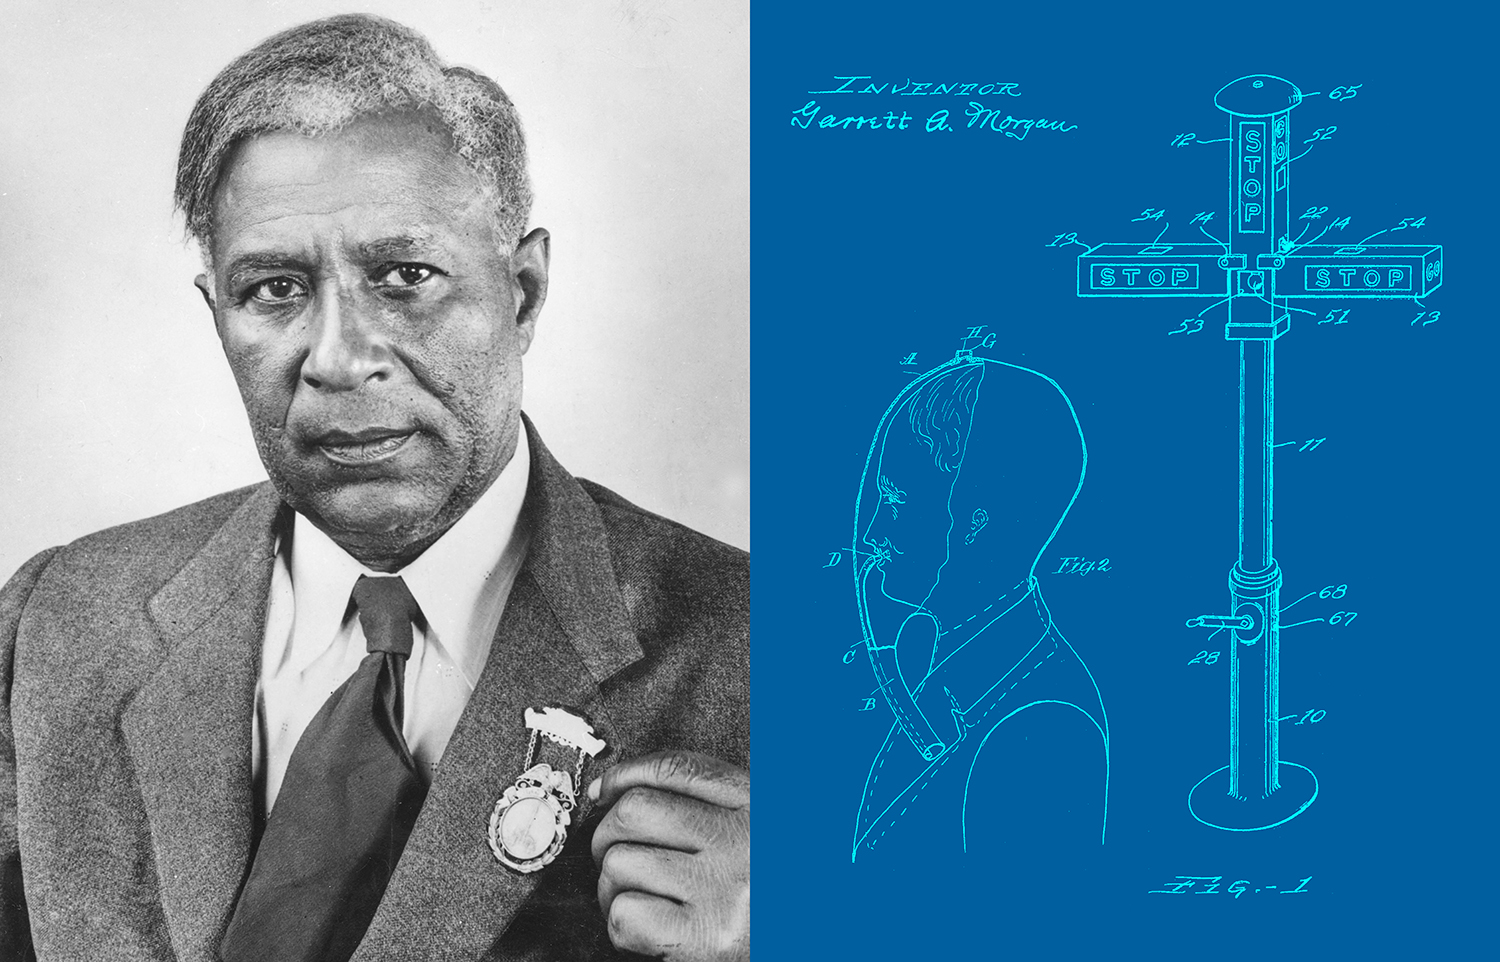 Garrett Morgan with a medal pinned to his suit jacket alongside drawings from his smoke hood and traffic signal patent